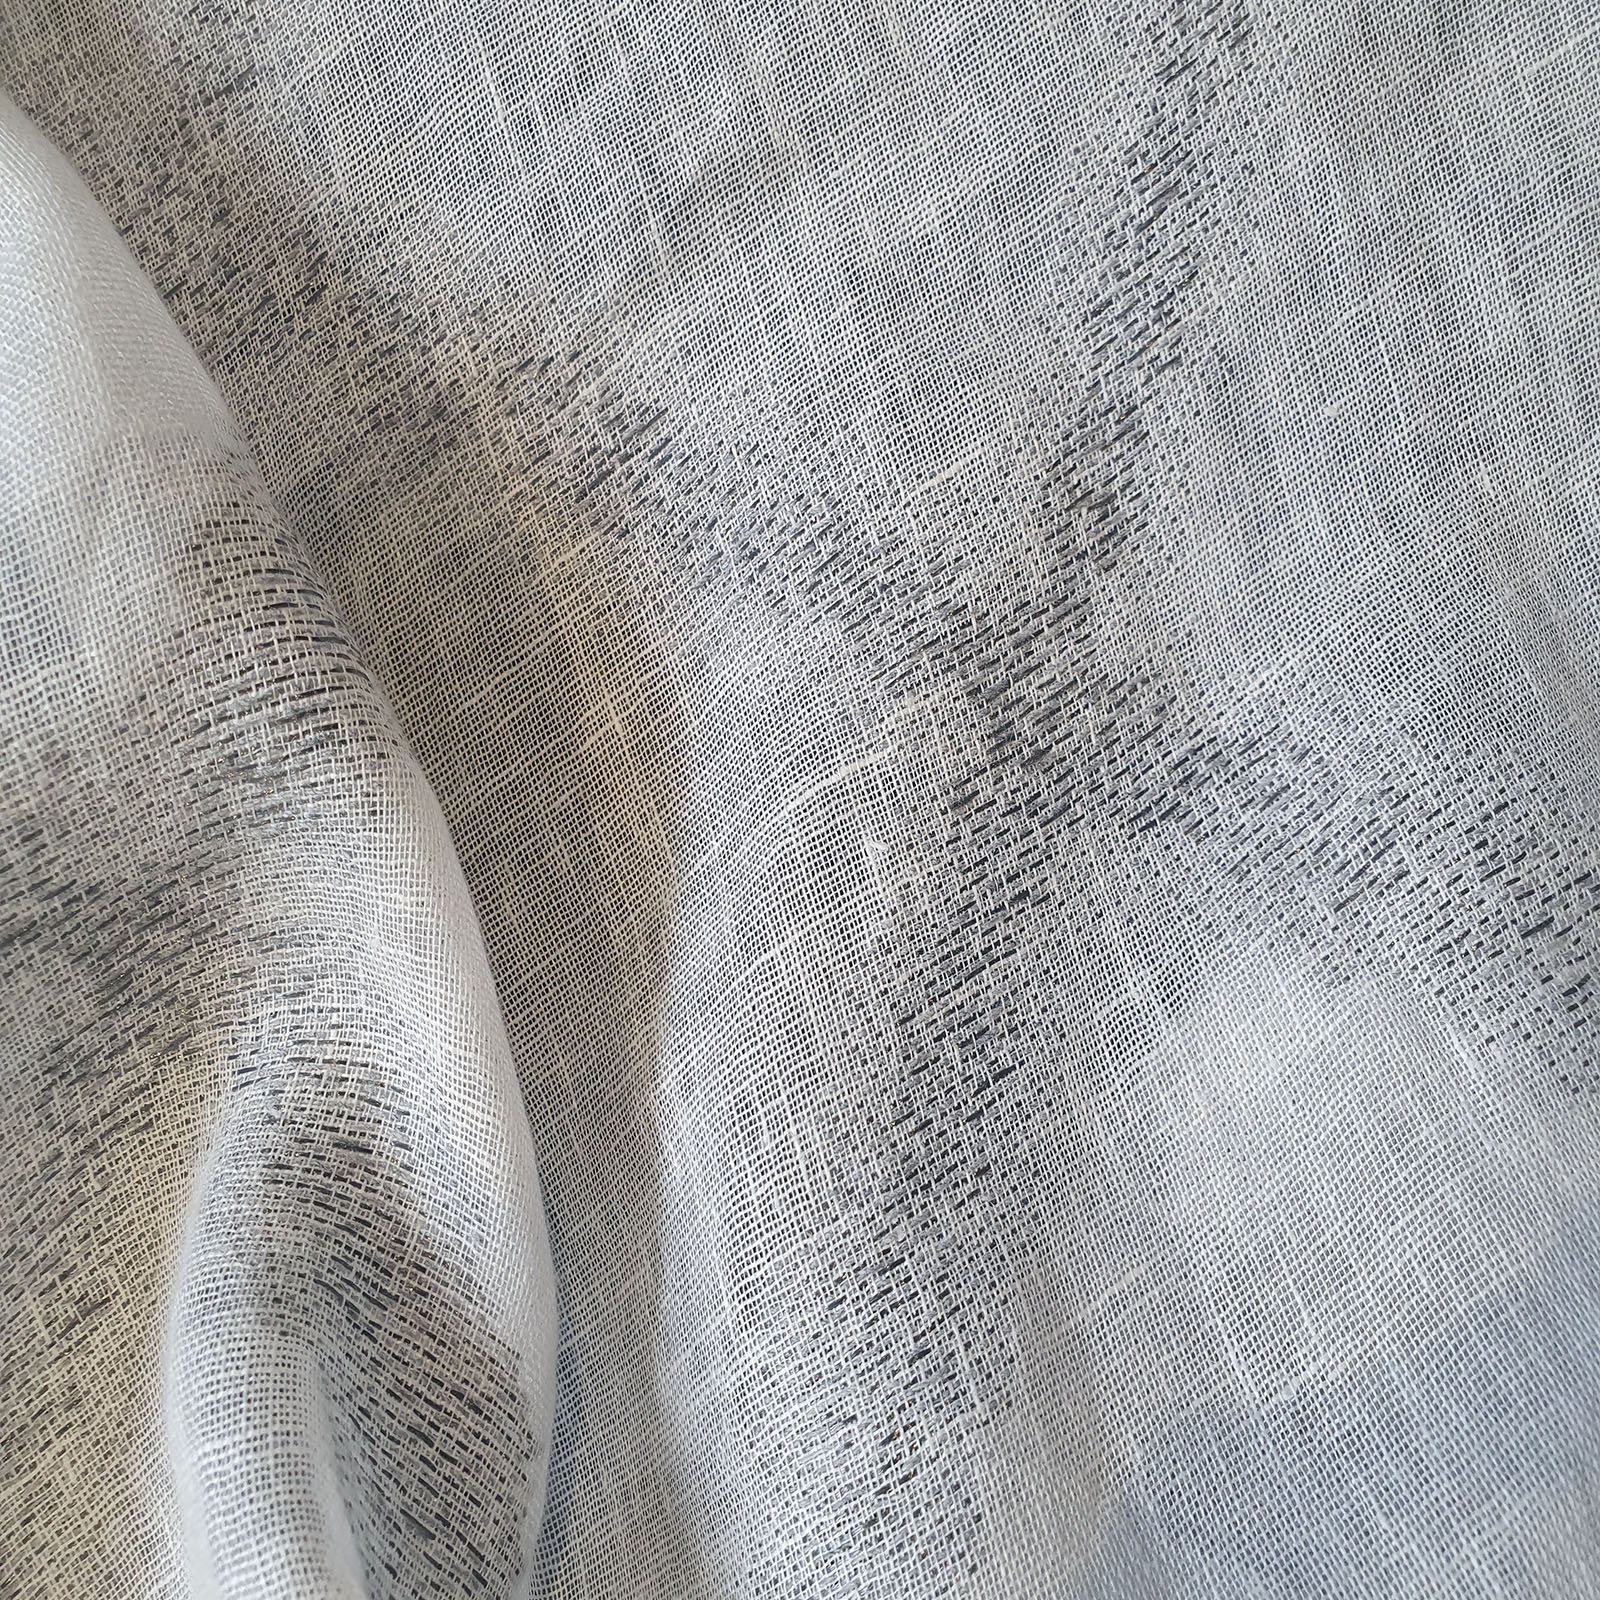 LI391531 WHIDE CM 330 85%LIN 7%PL 8%COT
Jacquard net weaving   100% linen soft finishing.<br /> 100% Made in Italy fabric. Style modern, rustic and trendy with fancy, plain, jacquard structures, small drawings and stripes decorations.

 Treatments: antibacterial and soft standard. Type of workings: jacquard. 